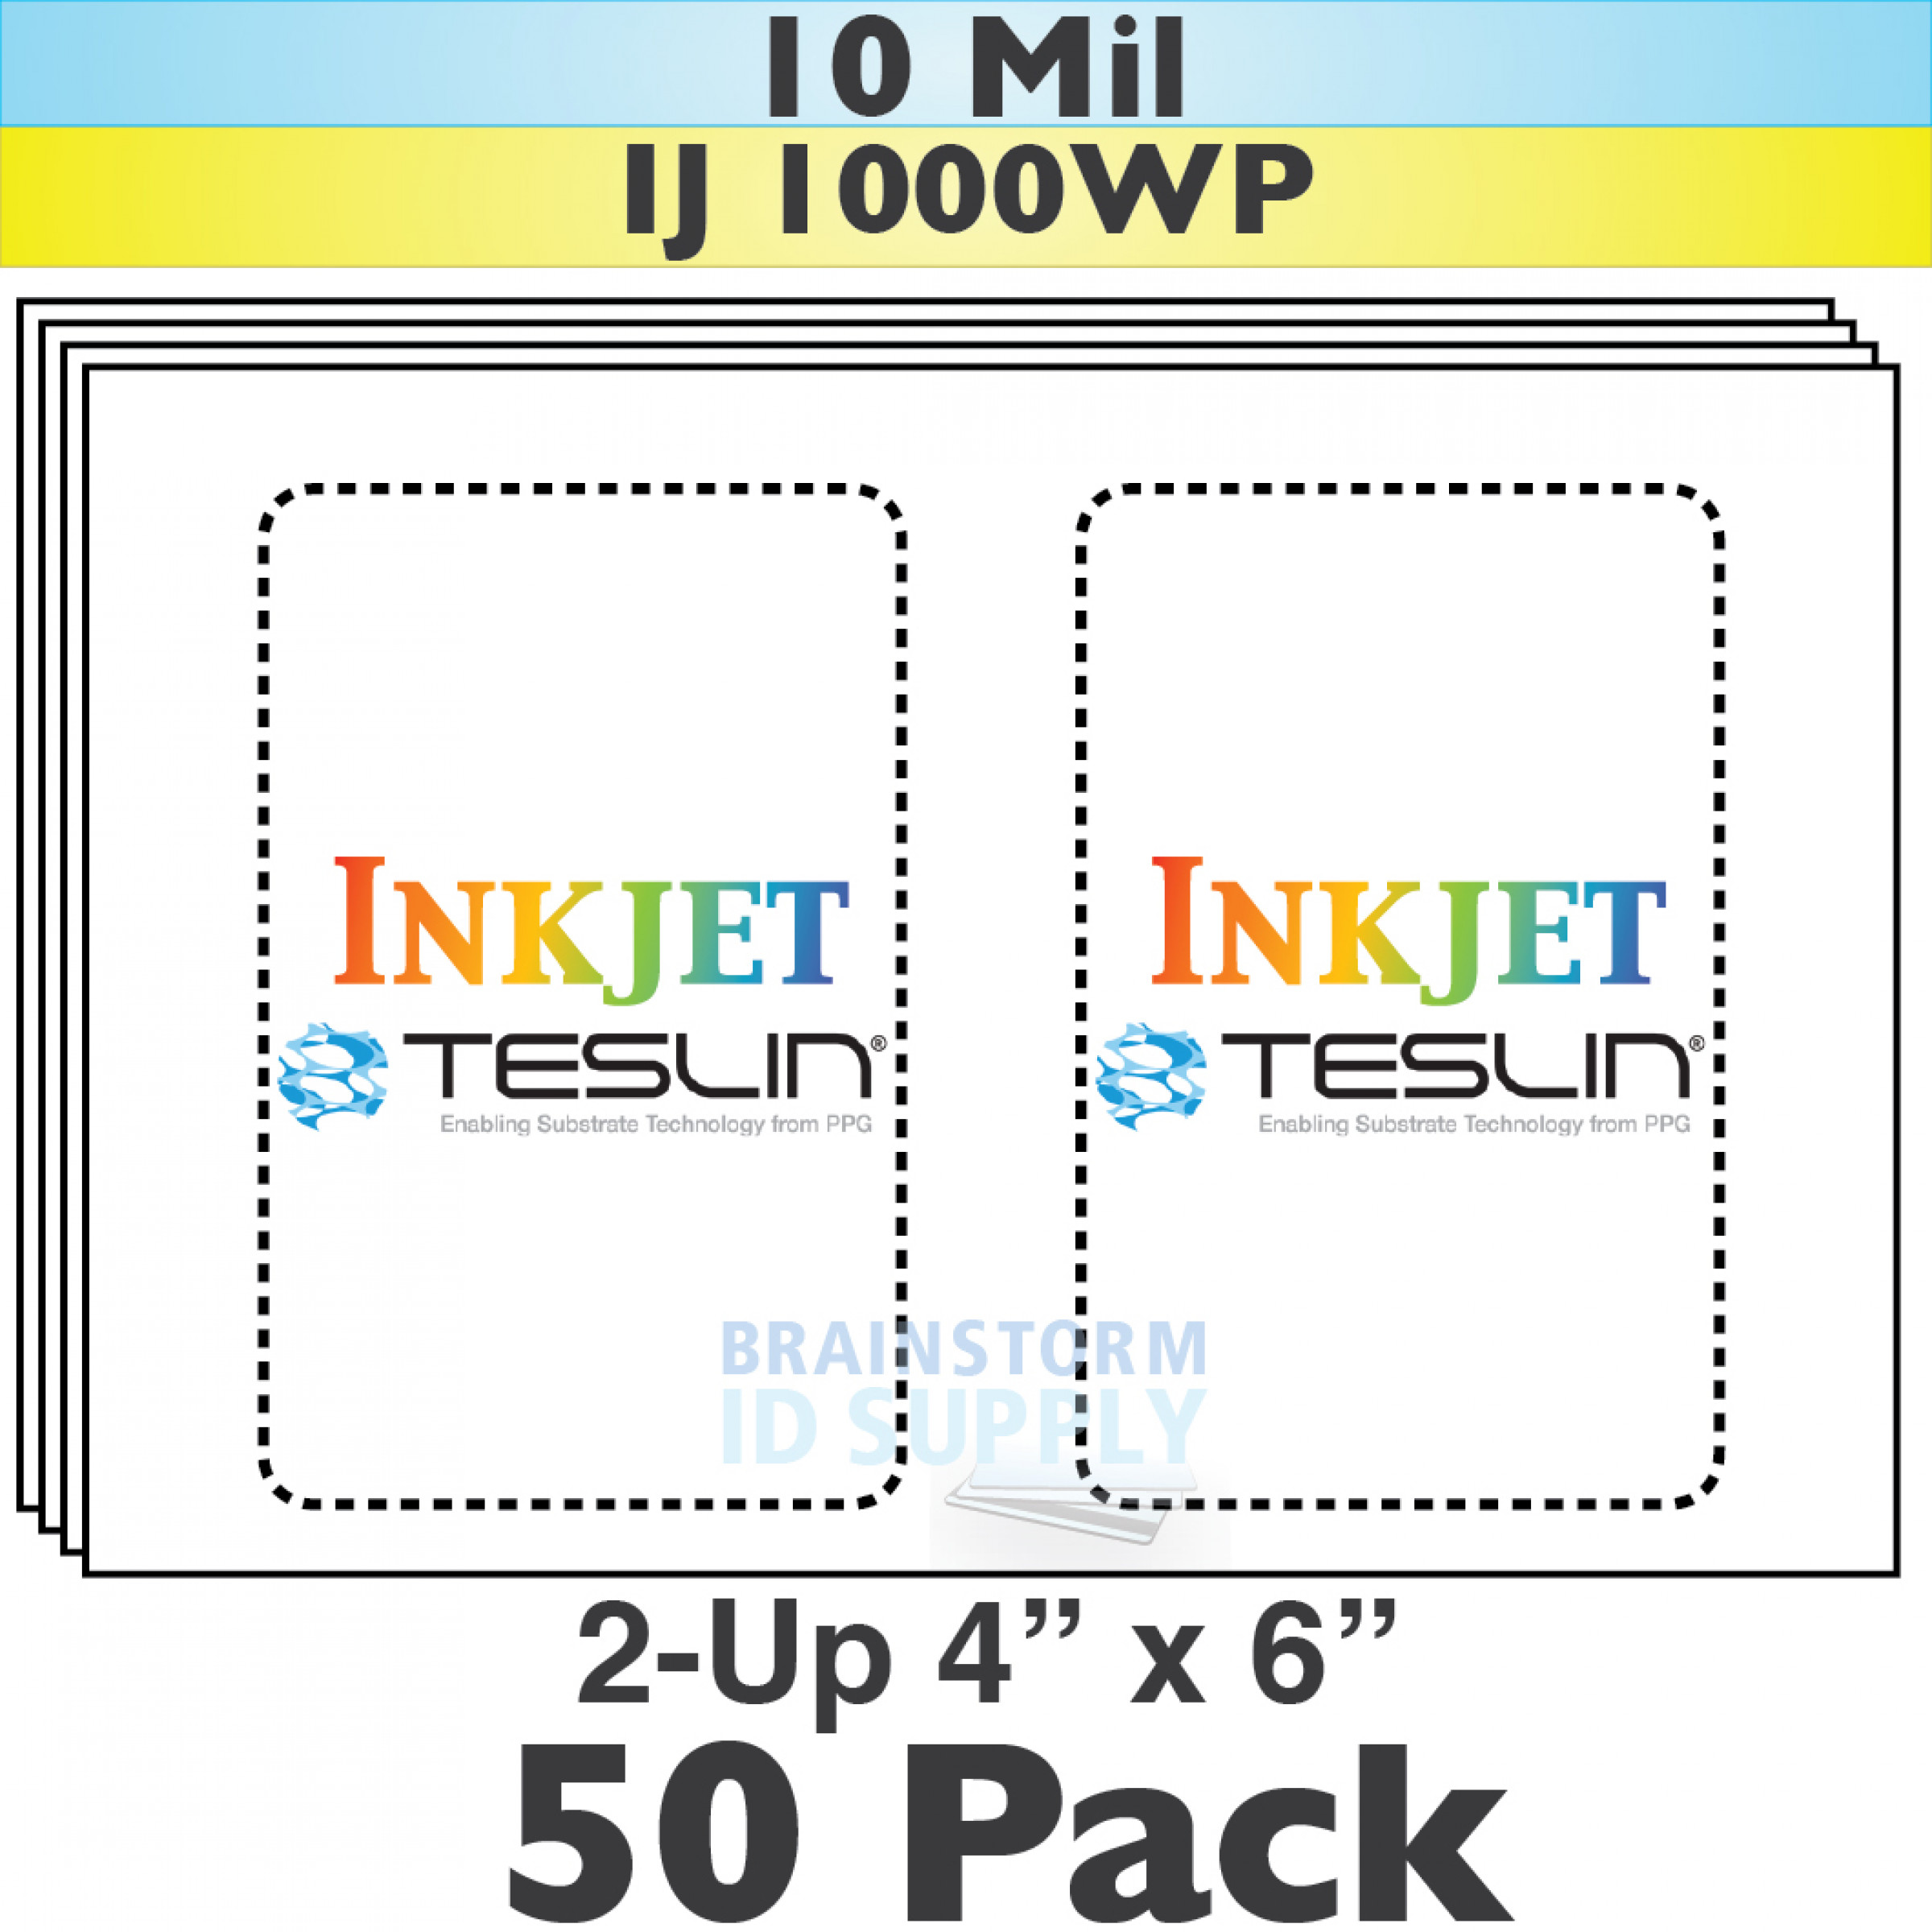 Inkjet Teslin Paper 25 Sheet Pack 4 x 6-1-Up Perforated 